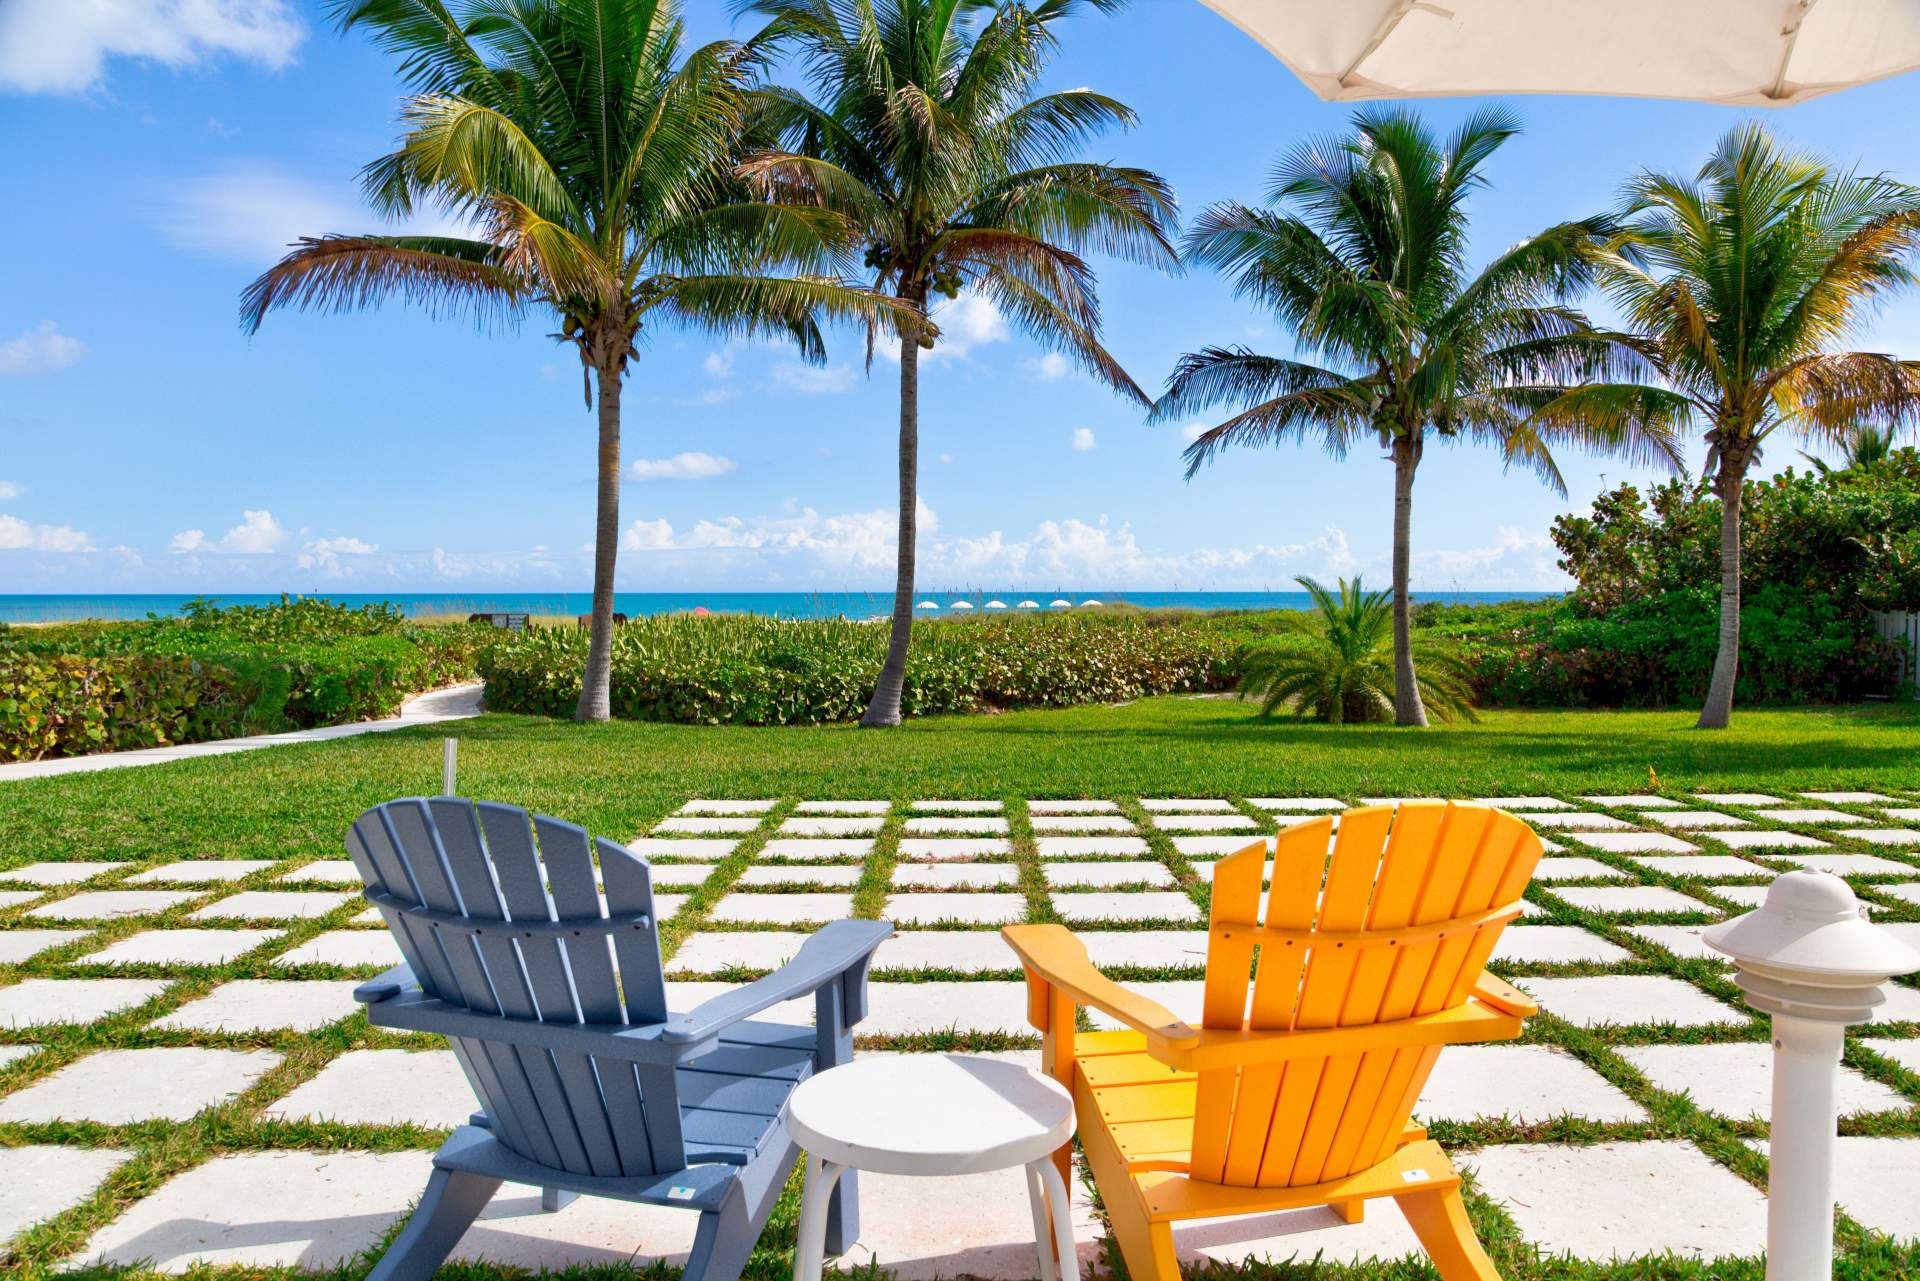 Blue and orange lawn chairs with palm trees and beach in the background